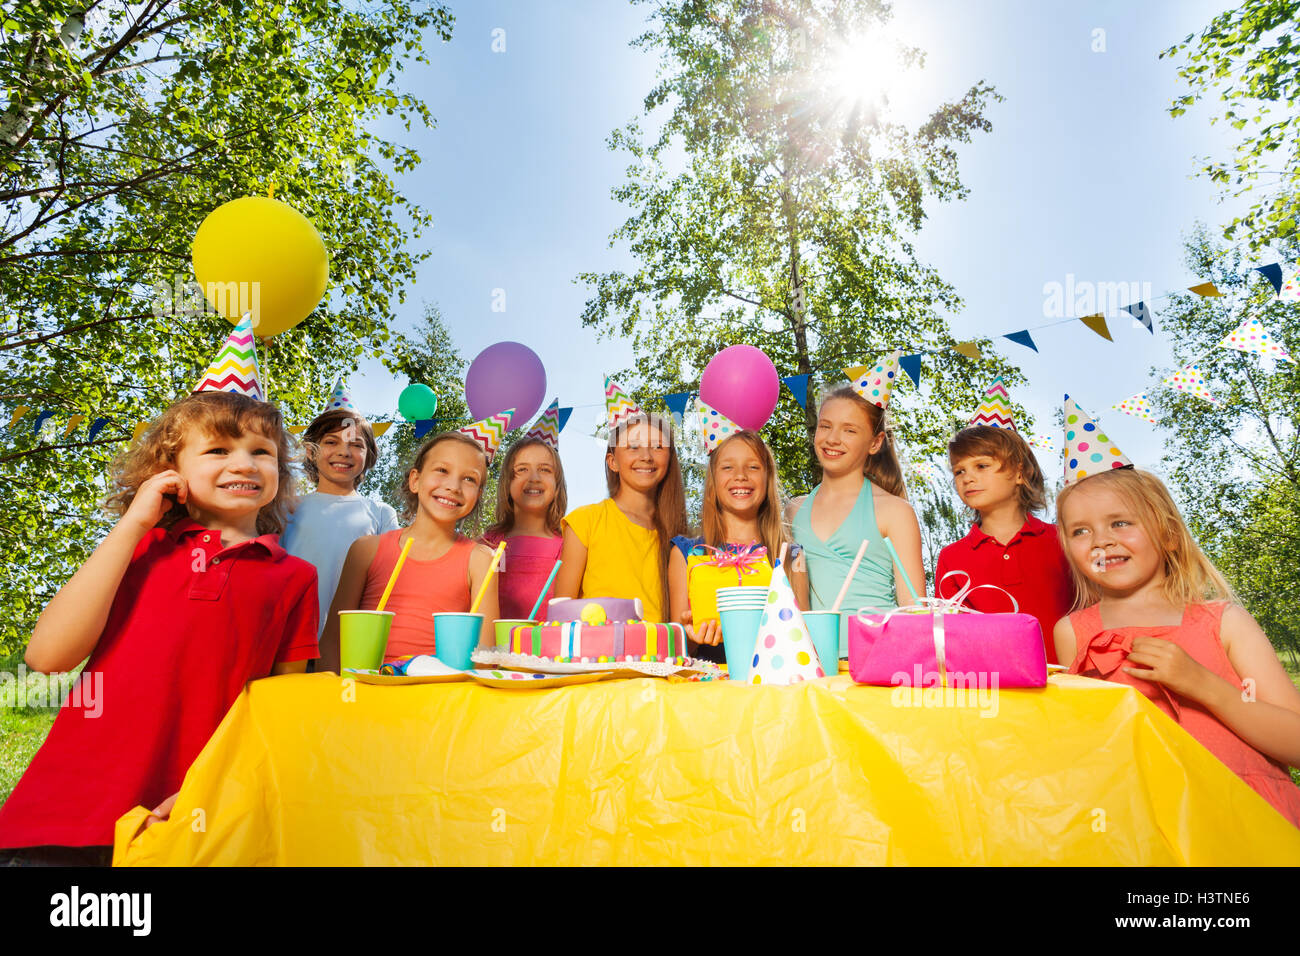 Adorable Kids having fun at the Birthday party Banque D'Images